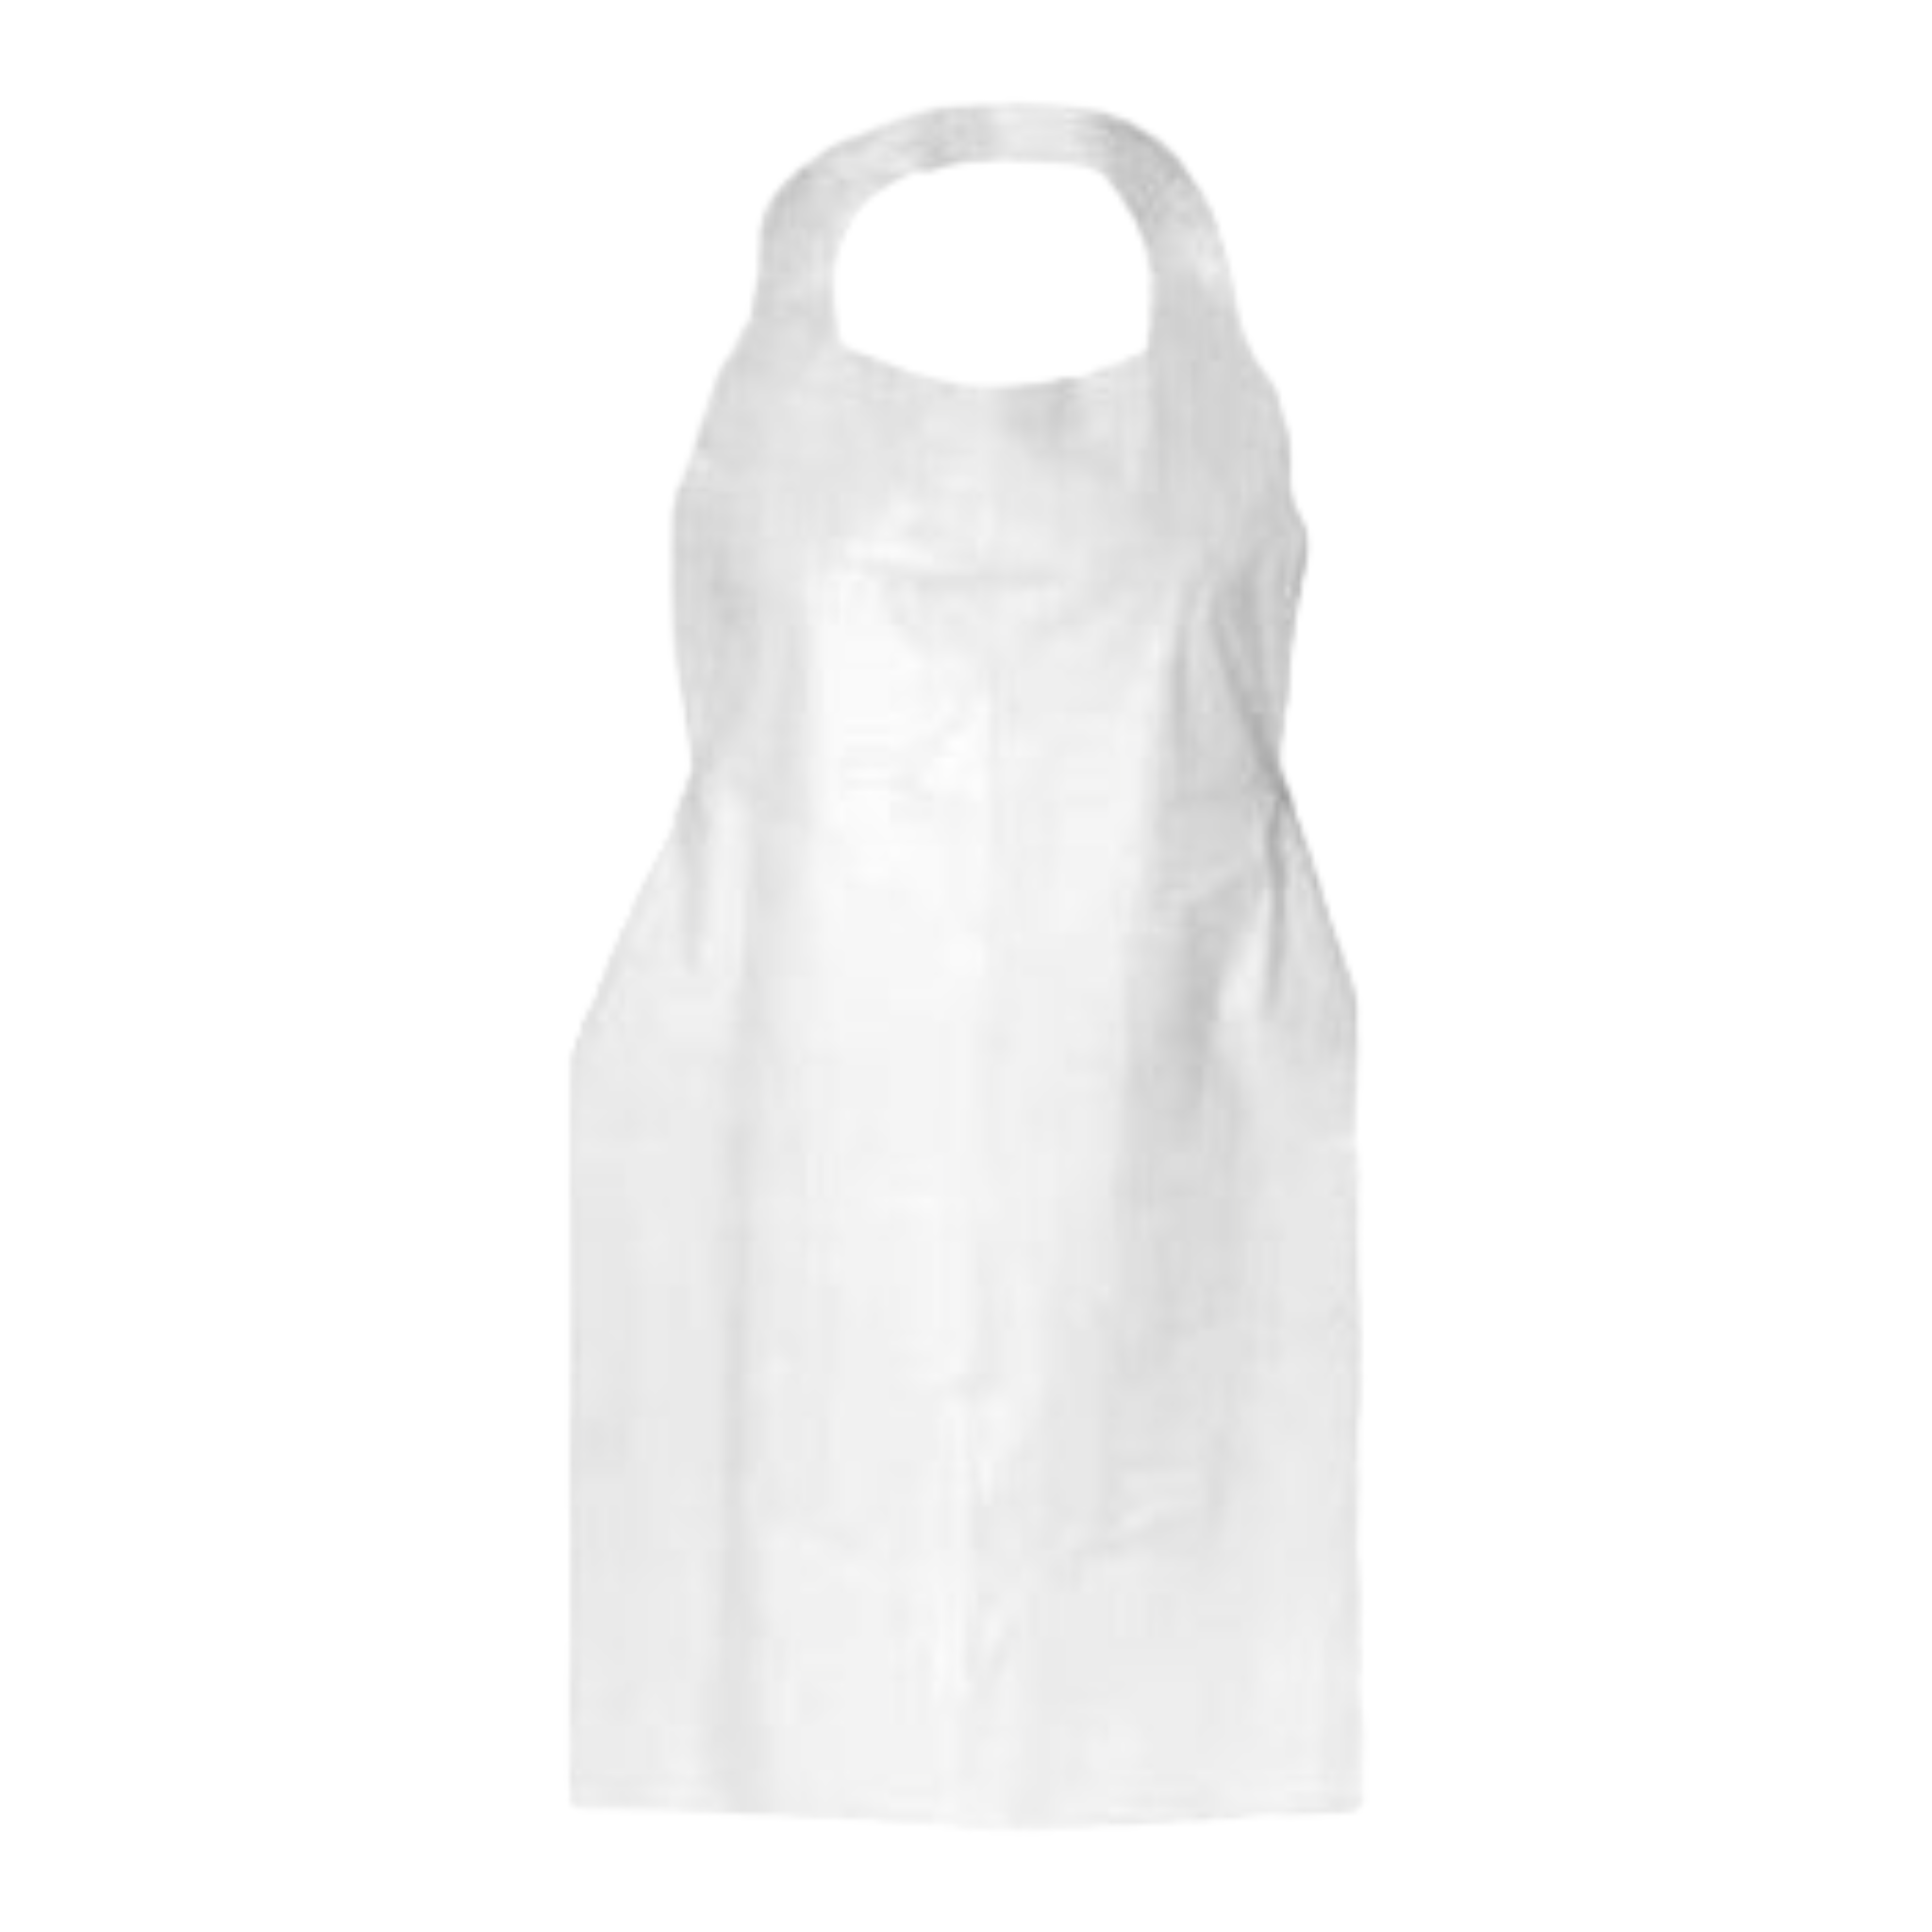 Apron Disposable Plastic White 660x1010mmx20mic 100pack